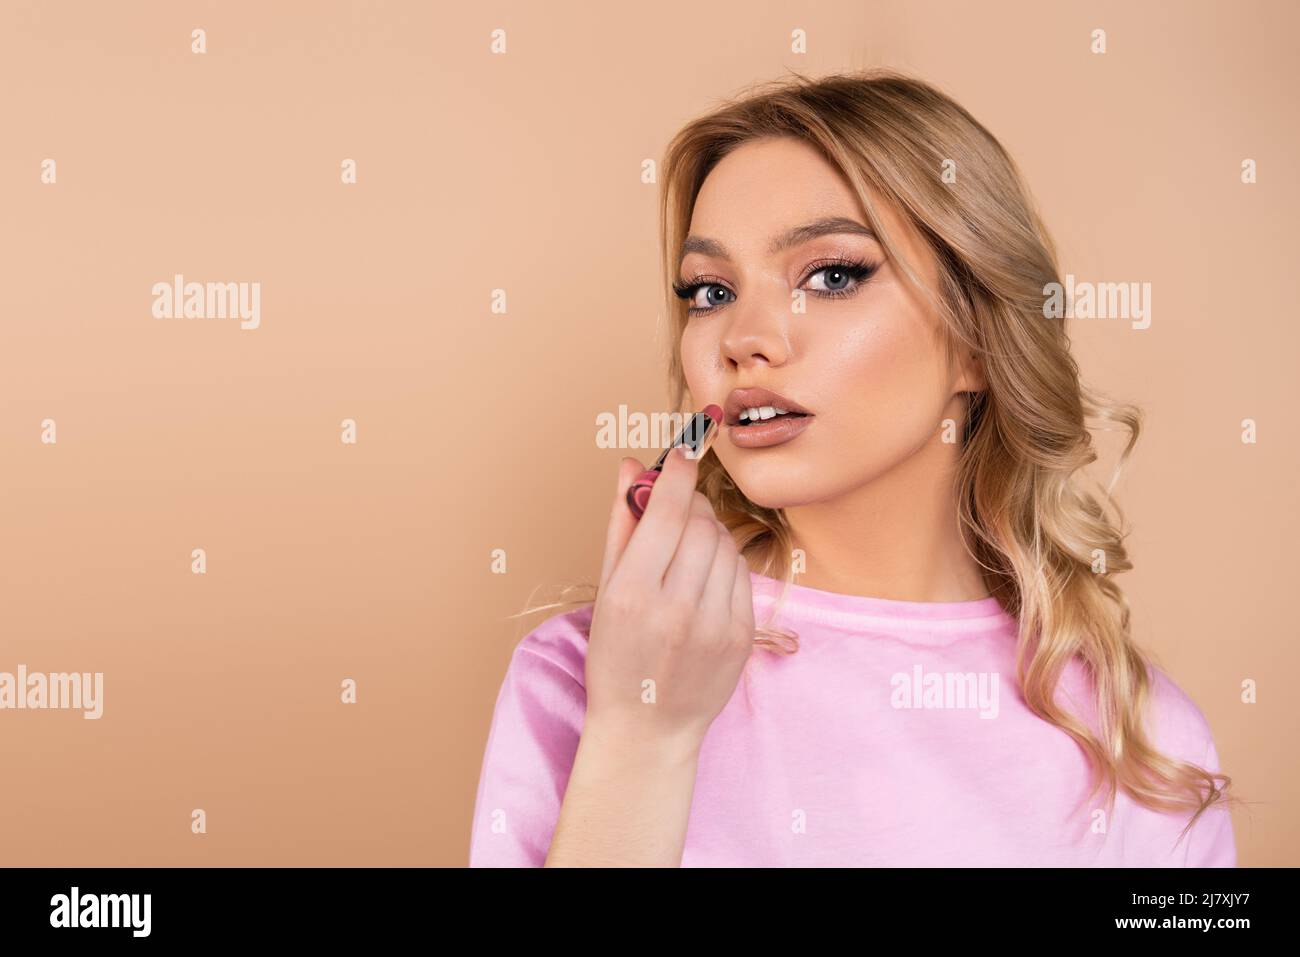 young and pretty woman applying lipstick isolated on beige Stock Photo